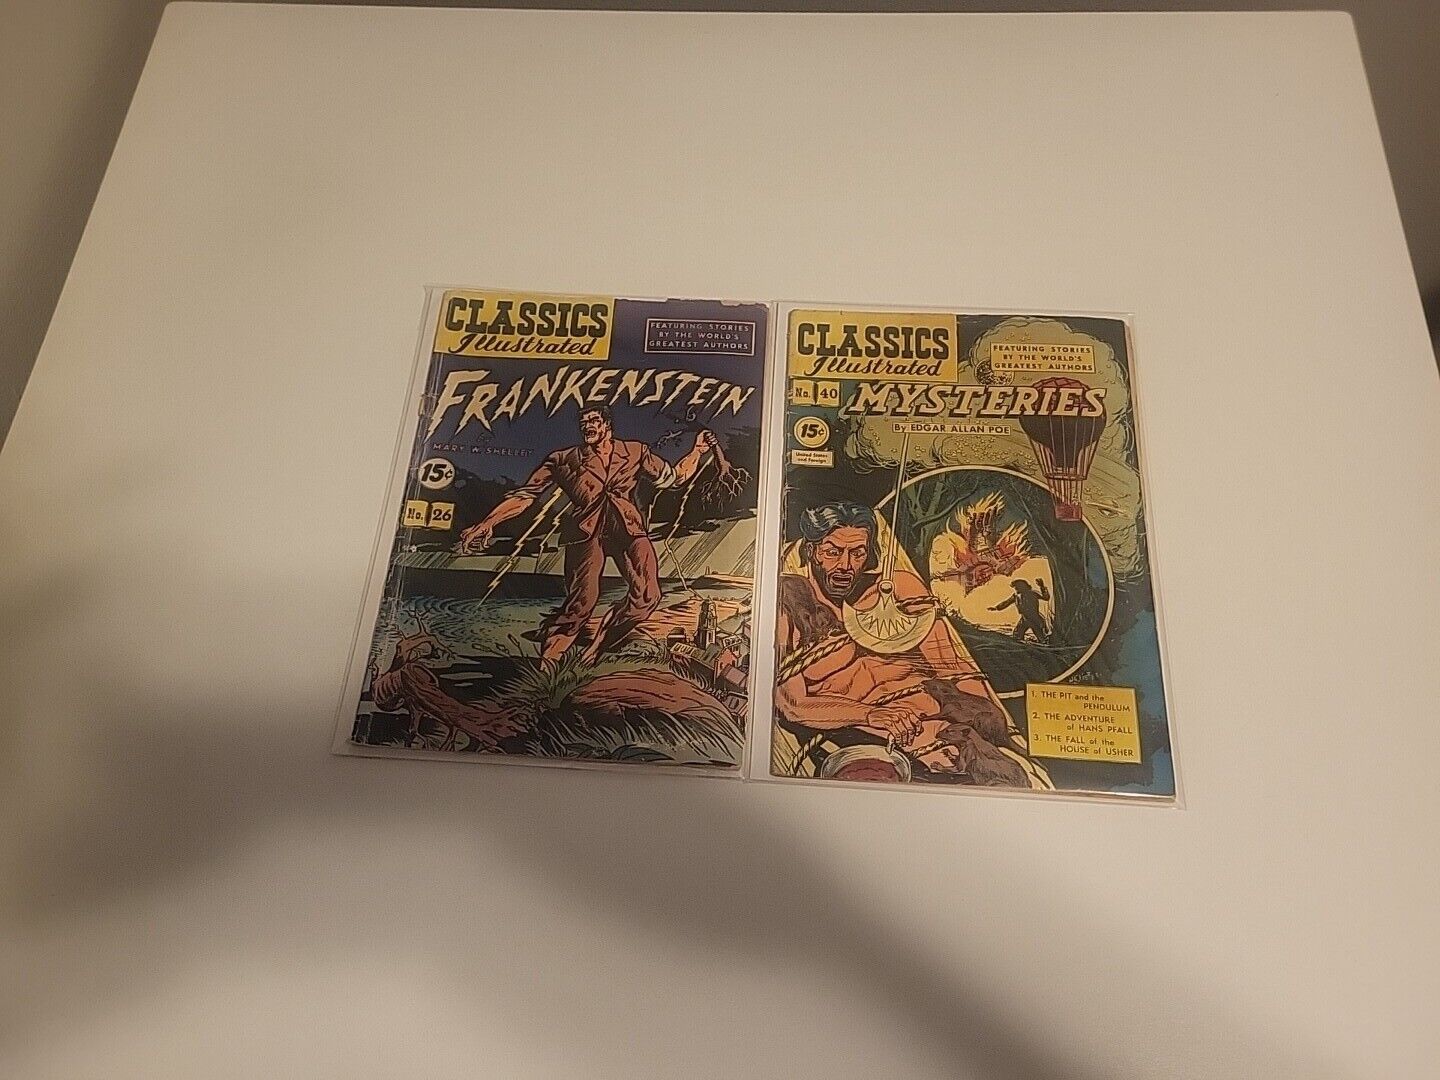 Classic illustrated #26 Frankenstein And Classics Illustrated #40 Mysteries Poe